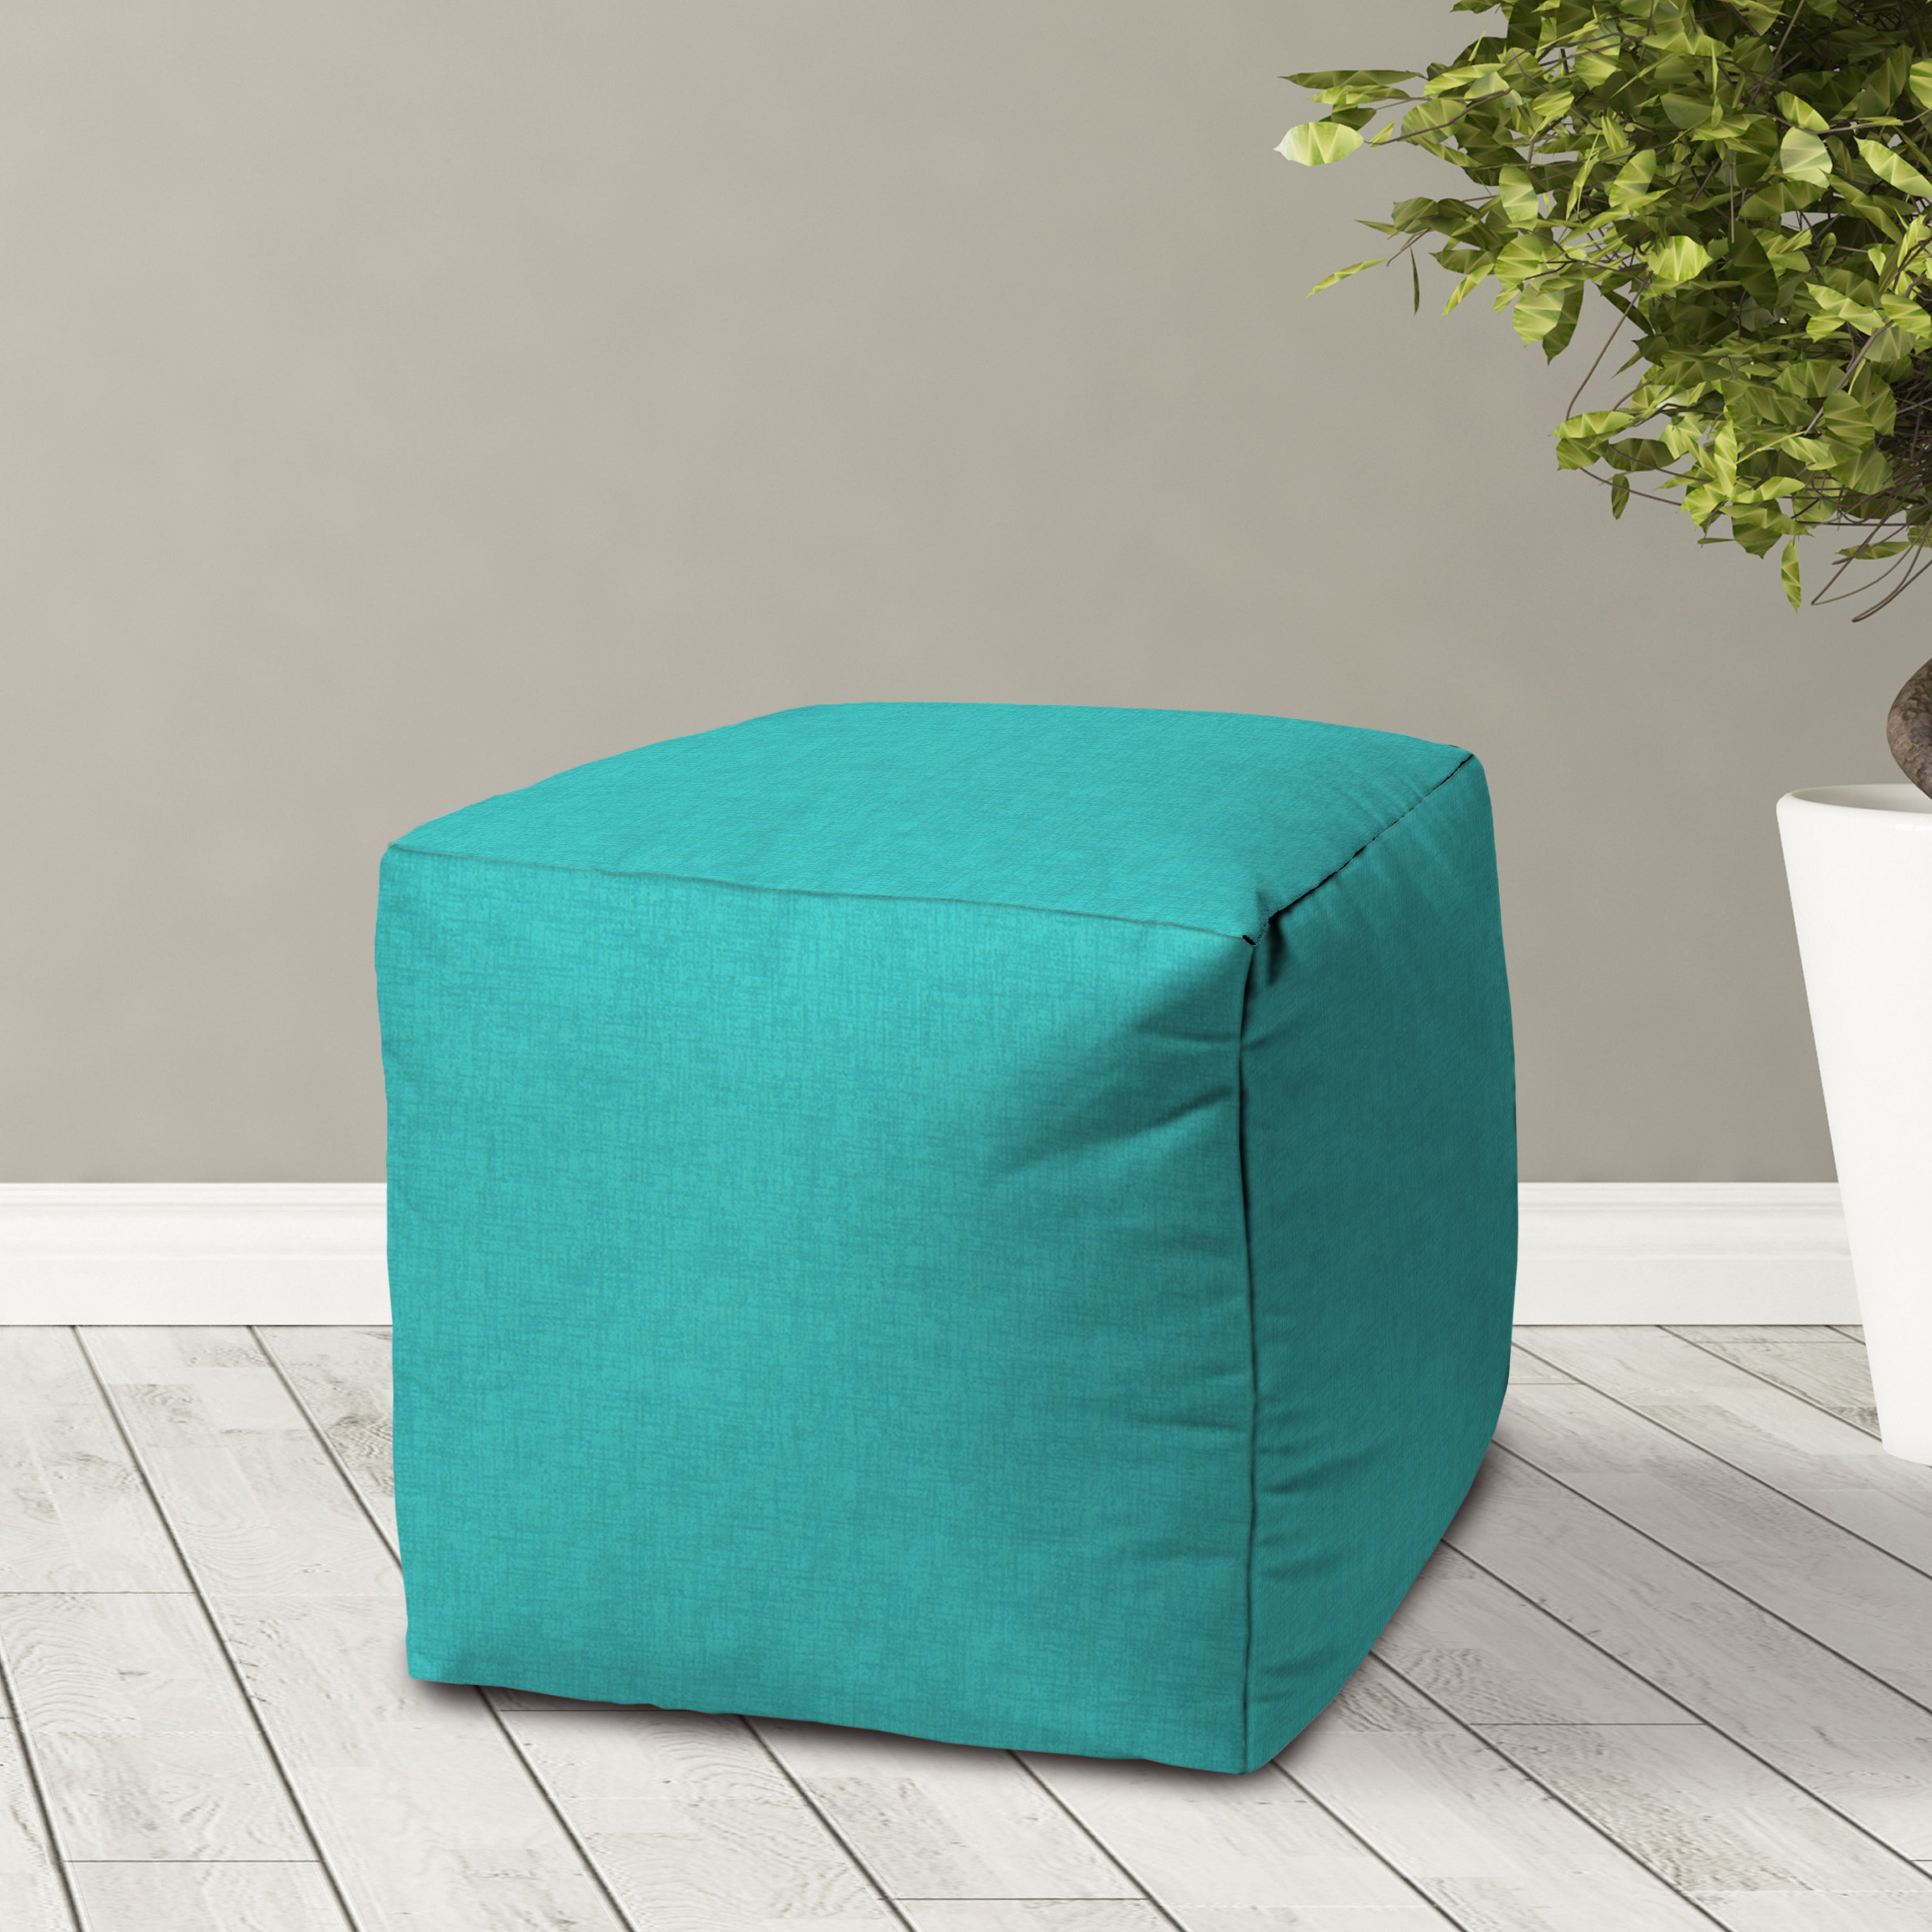 Turquoise Indoor/Outdoor Pouf - Zipper Cover Only